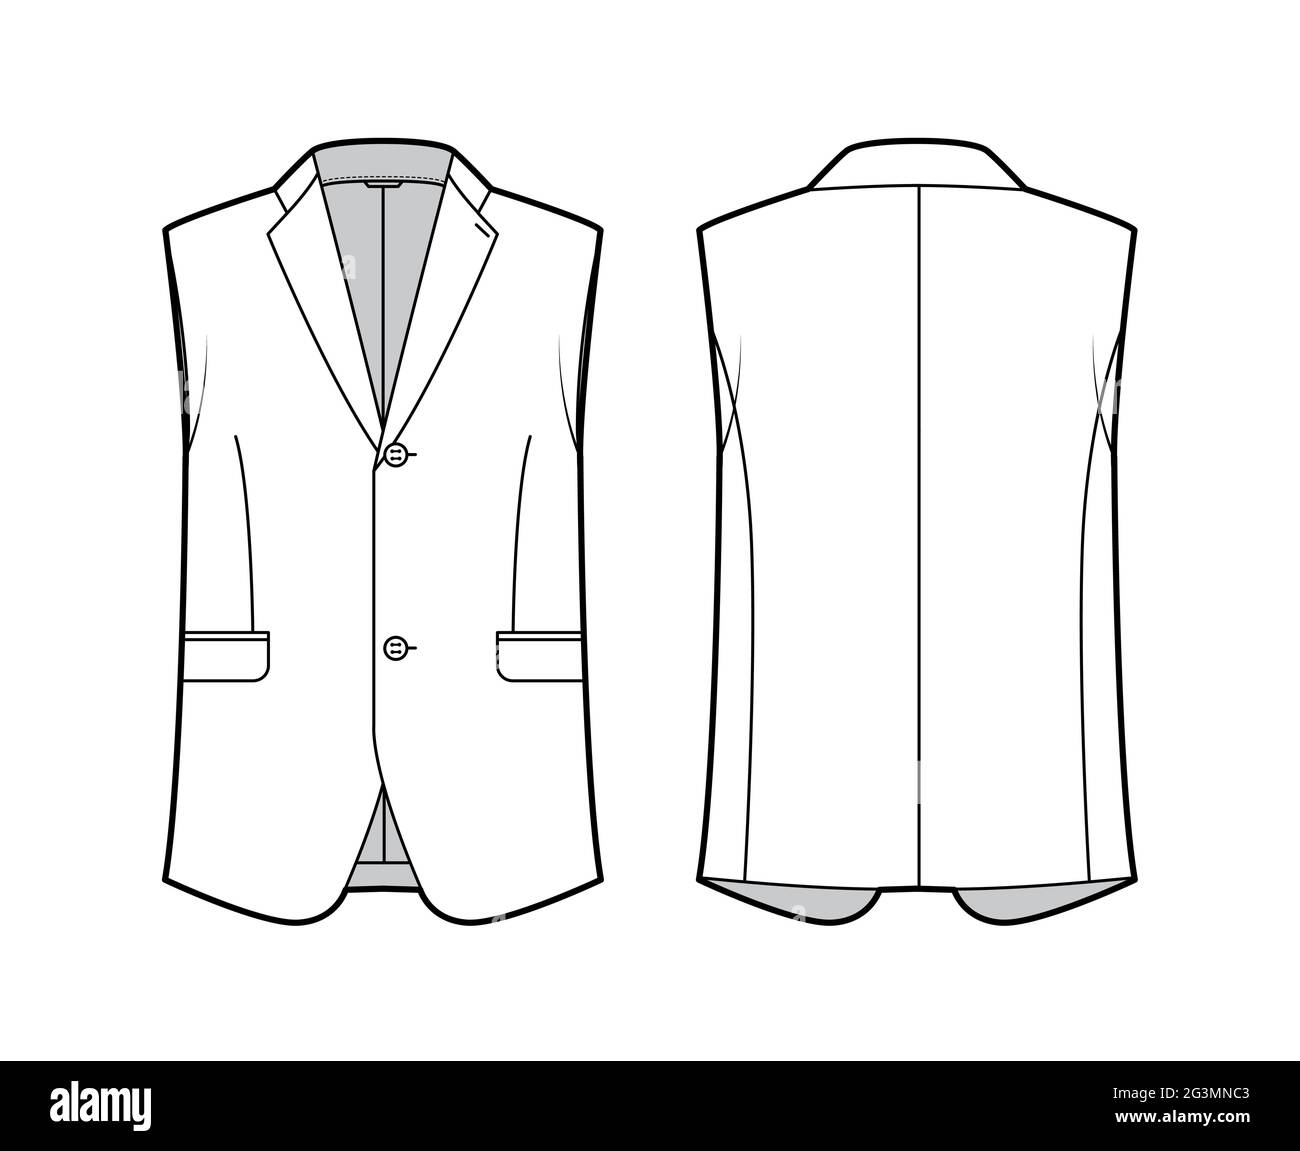 Sleeveless jacket lapelled vest waistcoat technical fashion illustration with single breasted, button-up closure, pockets. Flat template front, back white color style. Women, men unisex top CAD mockup Stock Vector